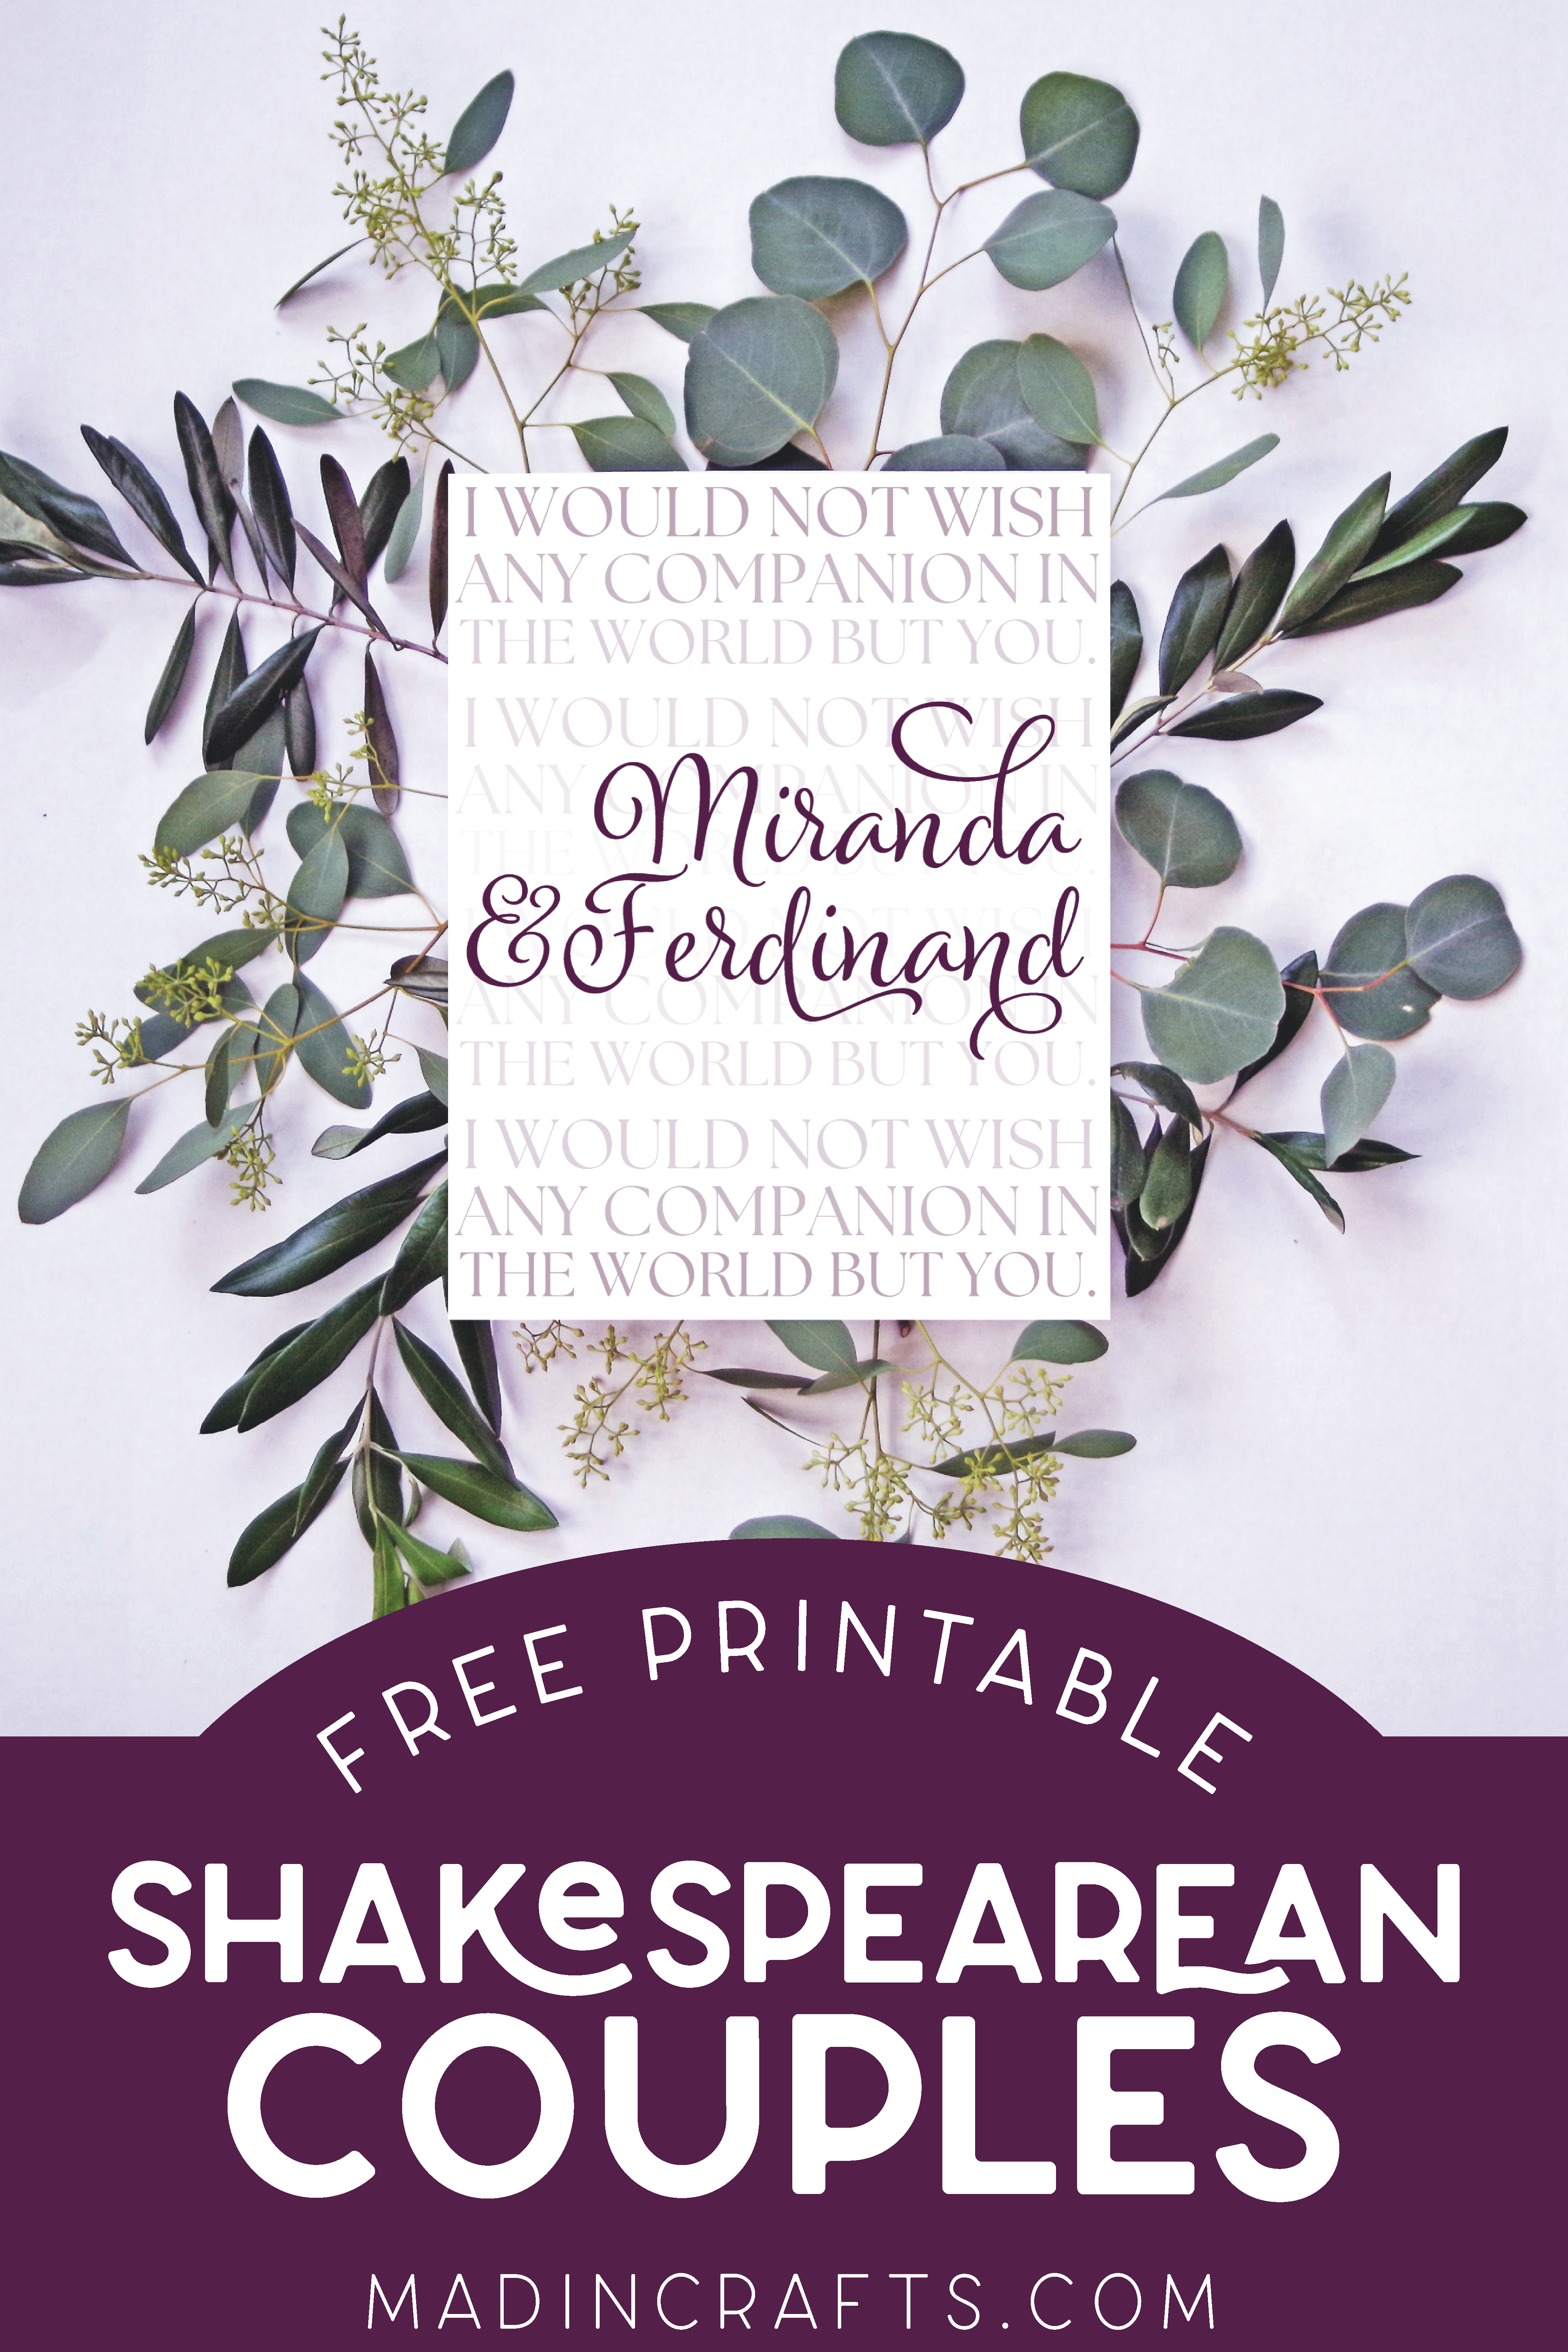 A printable featuring Miranda & Ferdinand from The Tempest sitting on preserved florals.